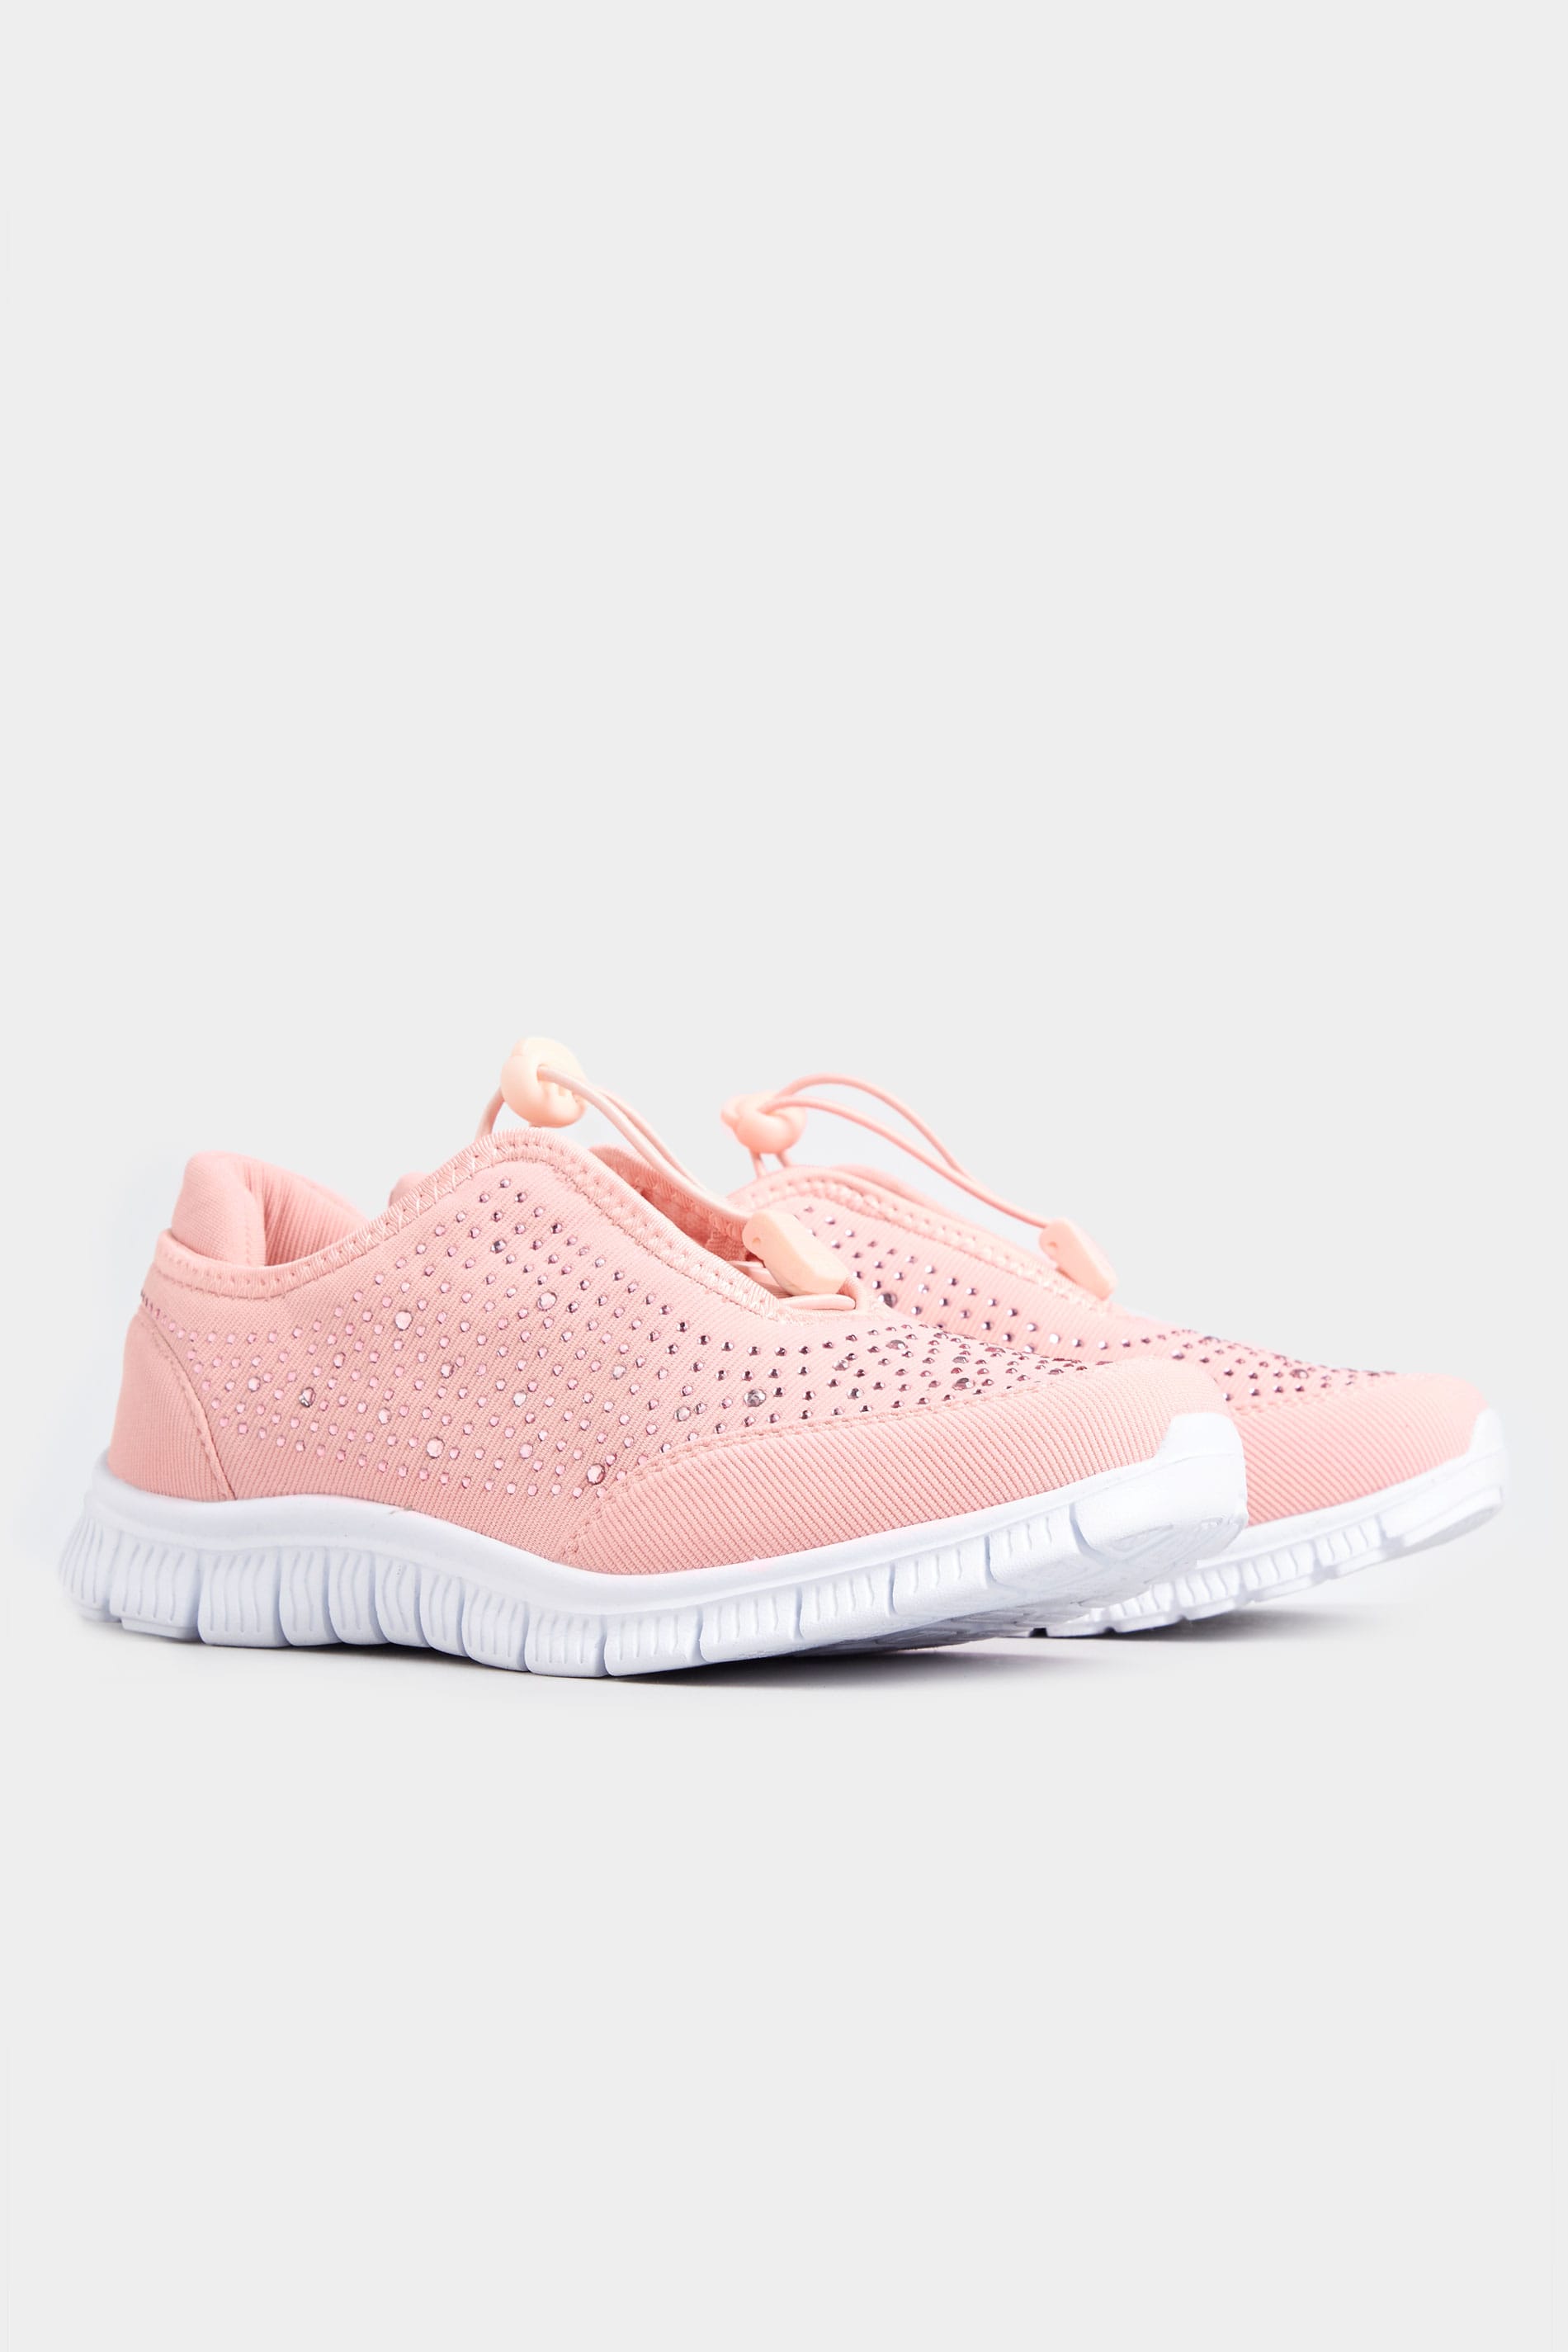 Pink Embellished Trainers In Extra Wide Fit_39b8.jpg